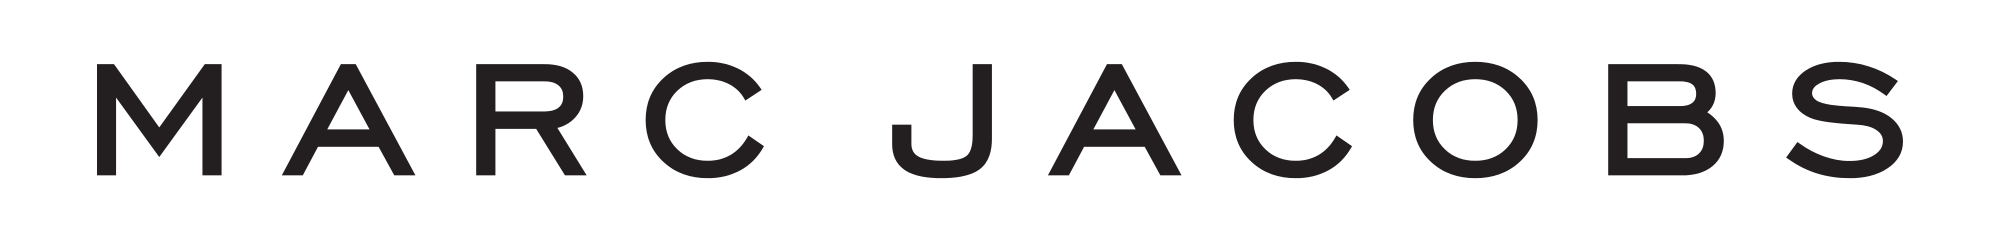 Jacobs Logo - File:Marc Jacobs logo.svg - Wikimedia Commons